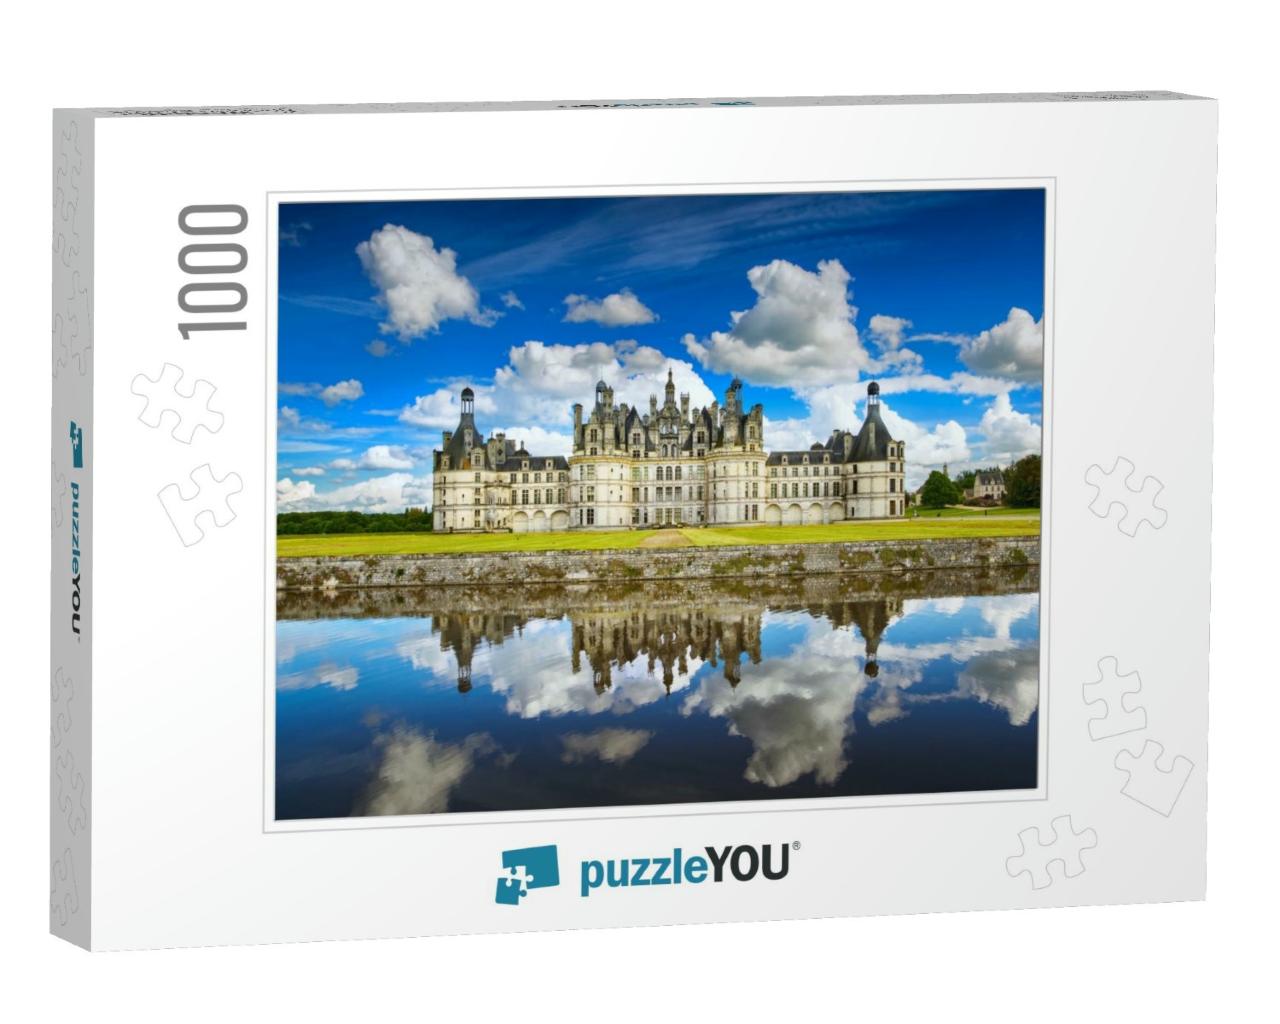 Chateau De Chambord, Royal Medieval French Castle & Refle... Jigsaw Puzzle with 1000 pieces